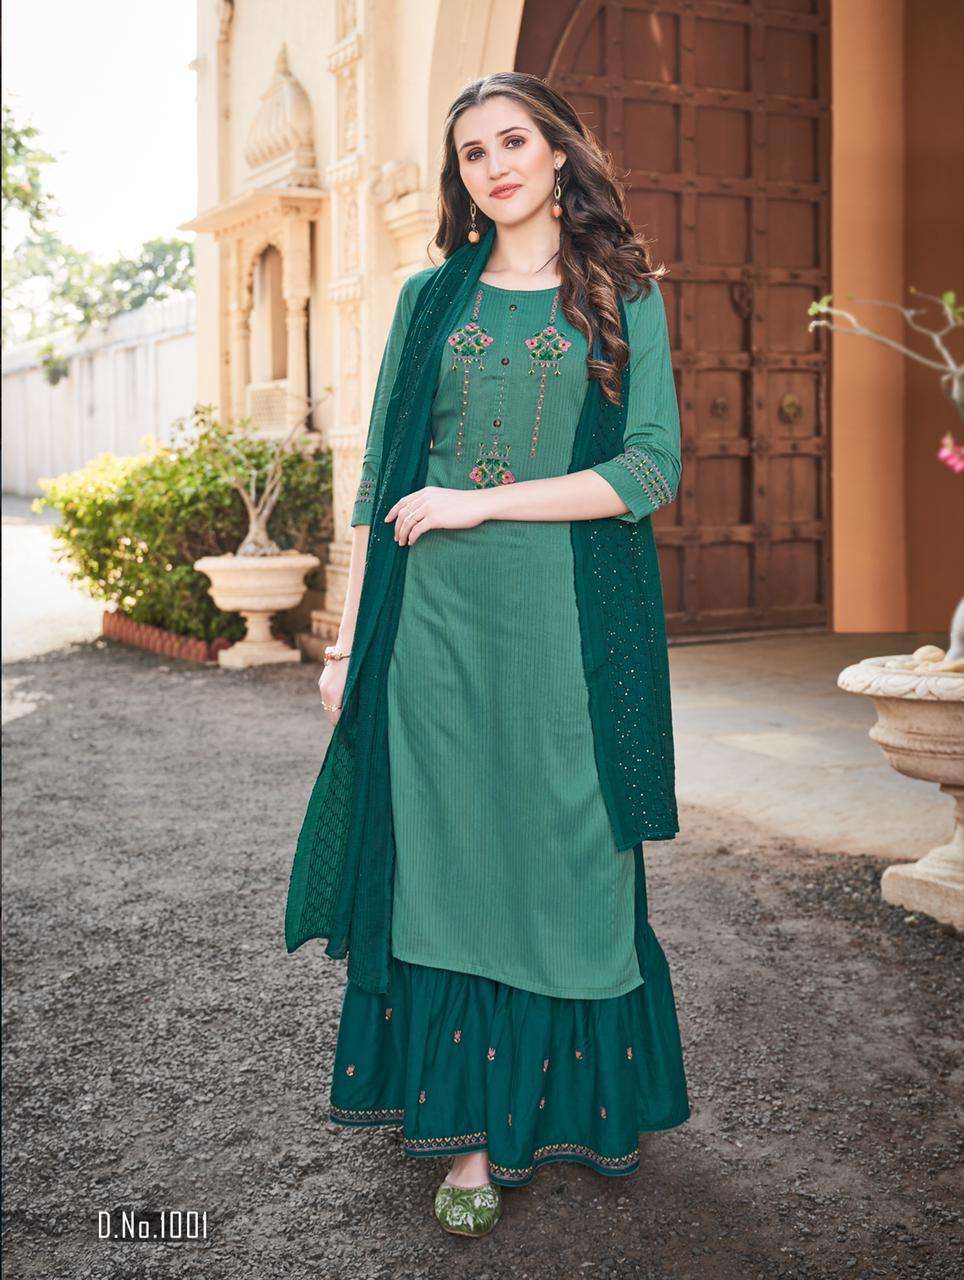 HEER BY LADY VIEW 1001 TO 1006 SERIES BEAUTIFUL SHARARA SUITS COLORFUL STYLISH FANCY CASUAL WEAR & ETHNIC WEAR VISCOSE SILK EMBROIDERED DRESSES AT WHOLESALE PRICE